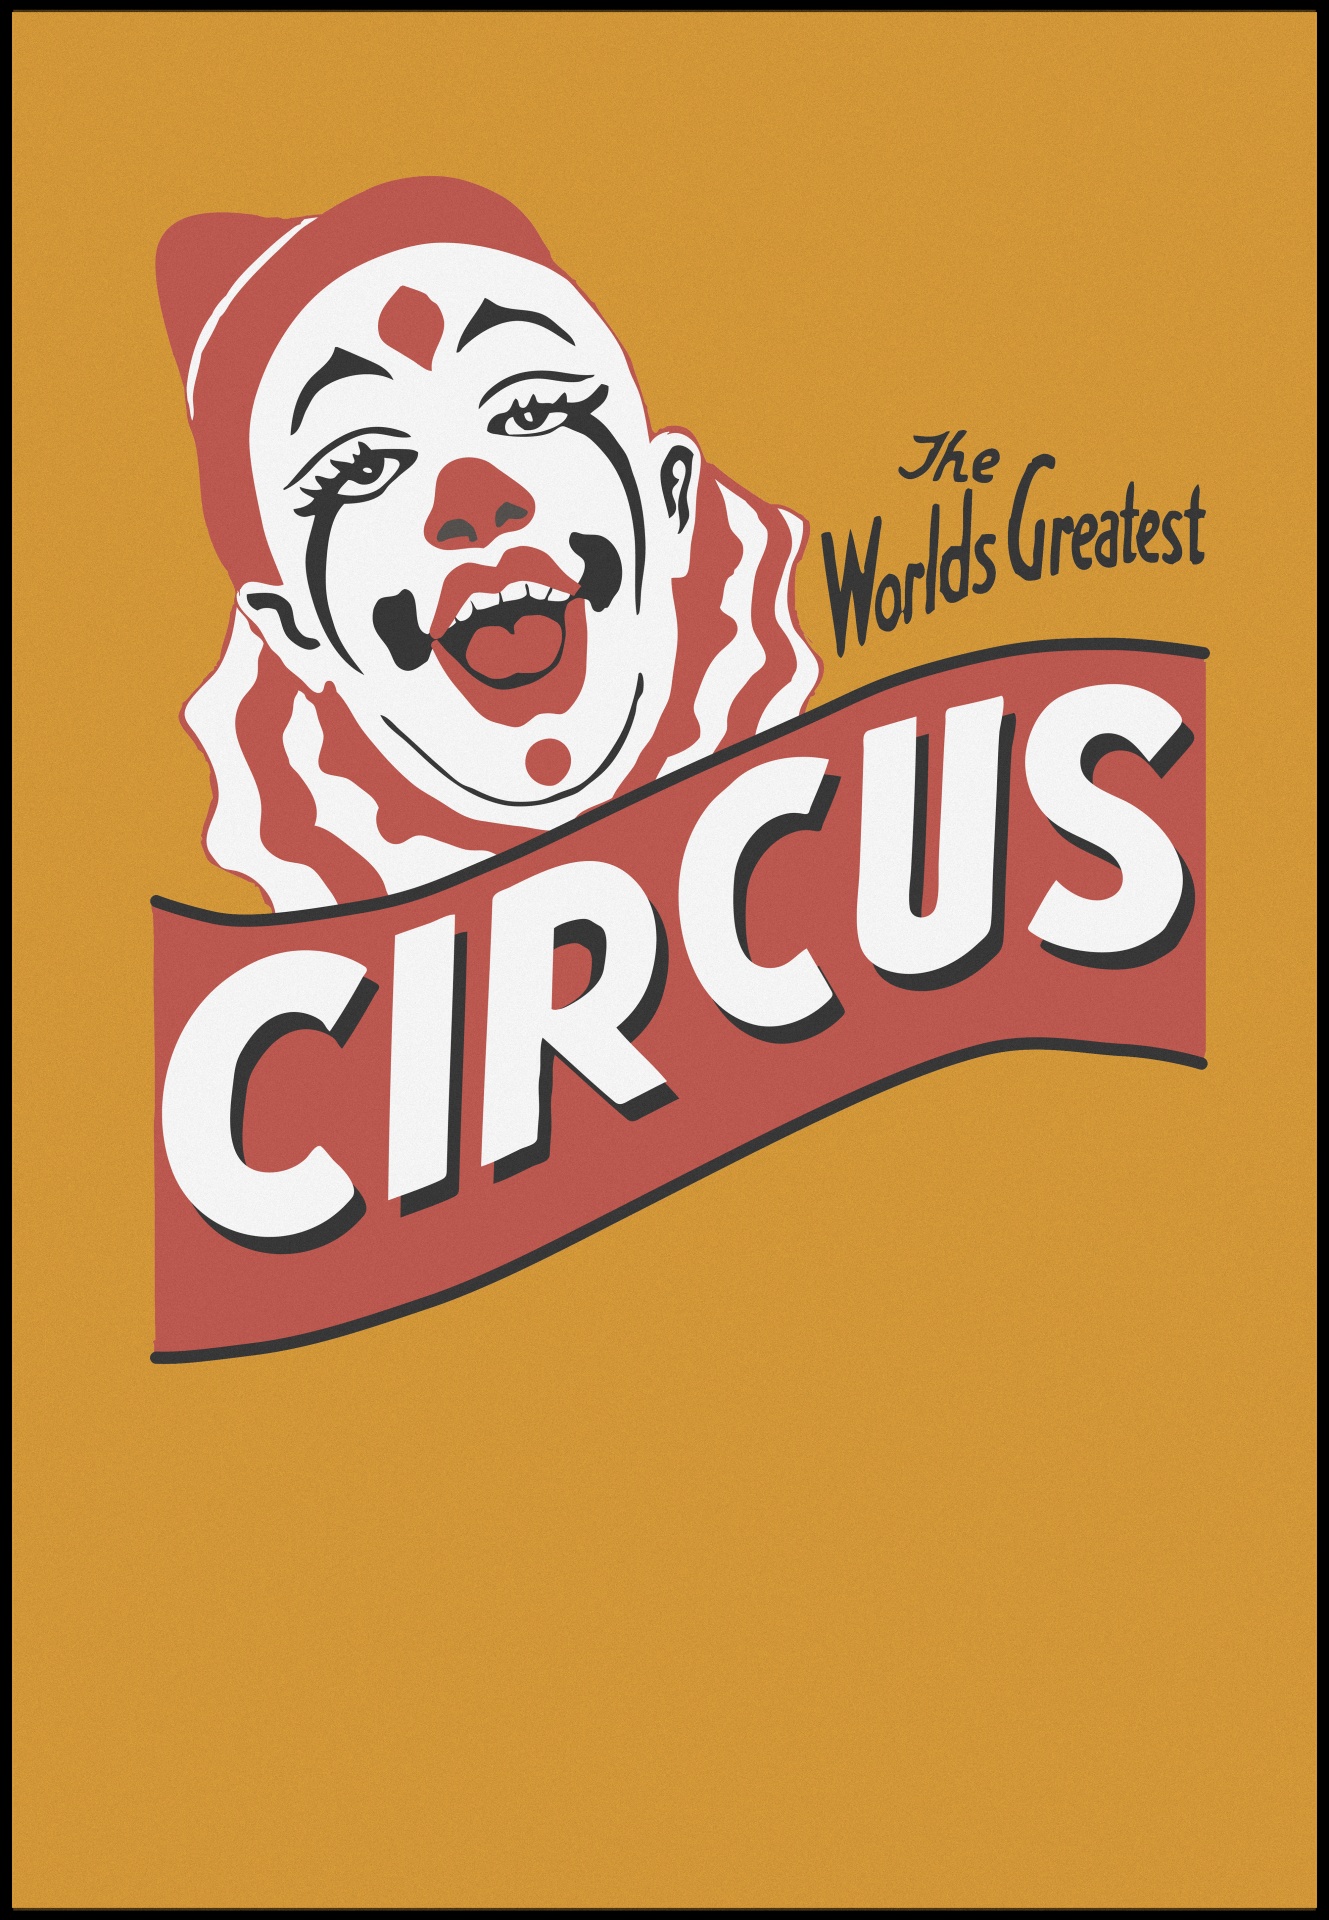 Retro, vintage style poster of red face of a laughing, happy circus clown on orange background with space for your copy text